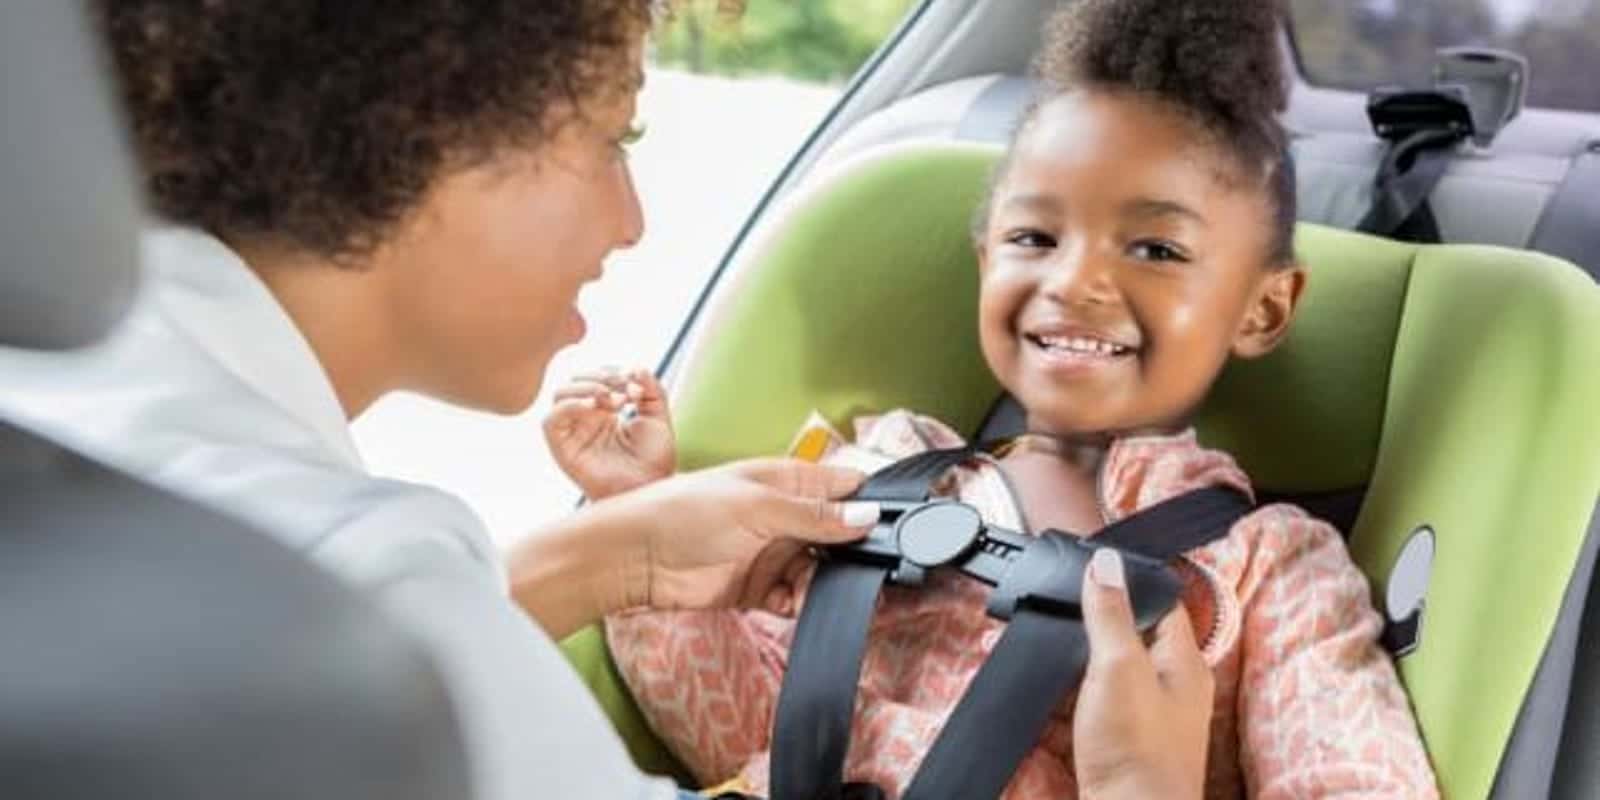 New Jersey Car Seat Laws 2022, When Can A Child Face Forward In Car Seat Nj